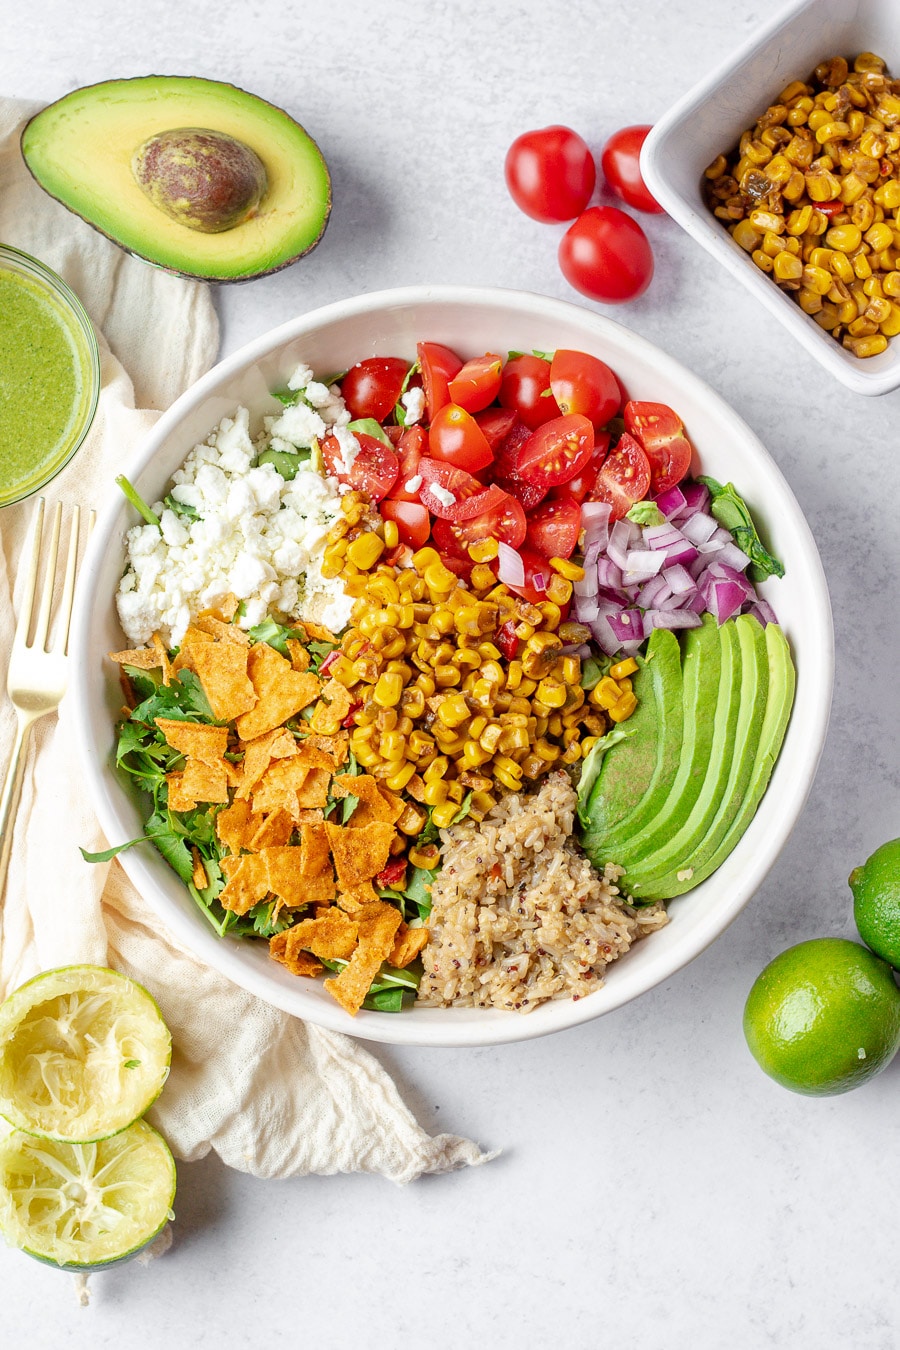 Sweetgreen's seasonal corn elote bowl was recently released, and it is so good. It brings together some of summer's best produce all with their lime cilantro jalapeño vinaigrette, ugh. So much goodness all in one bowl. Here's how you can make this copycat Sweetgreen Corn Elote Bowl recipe at home!